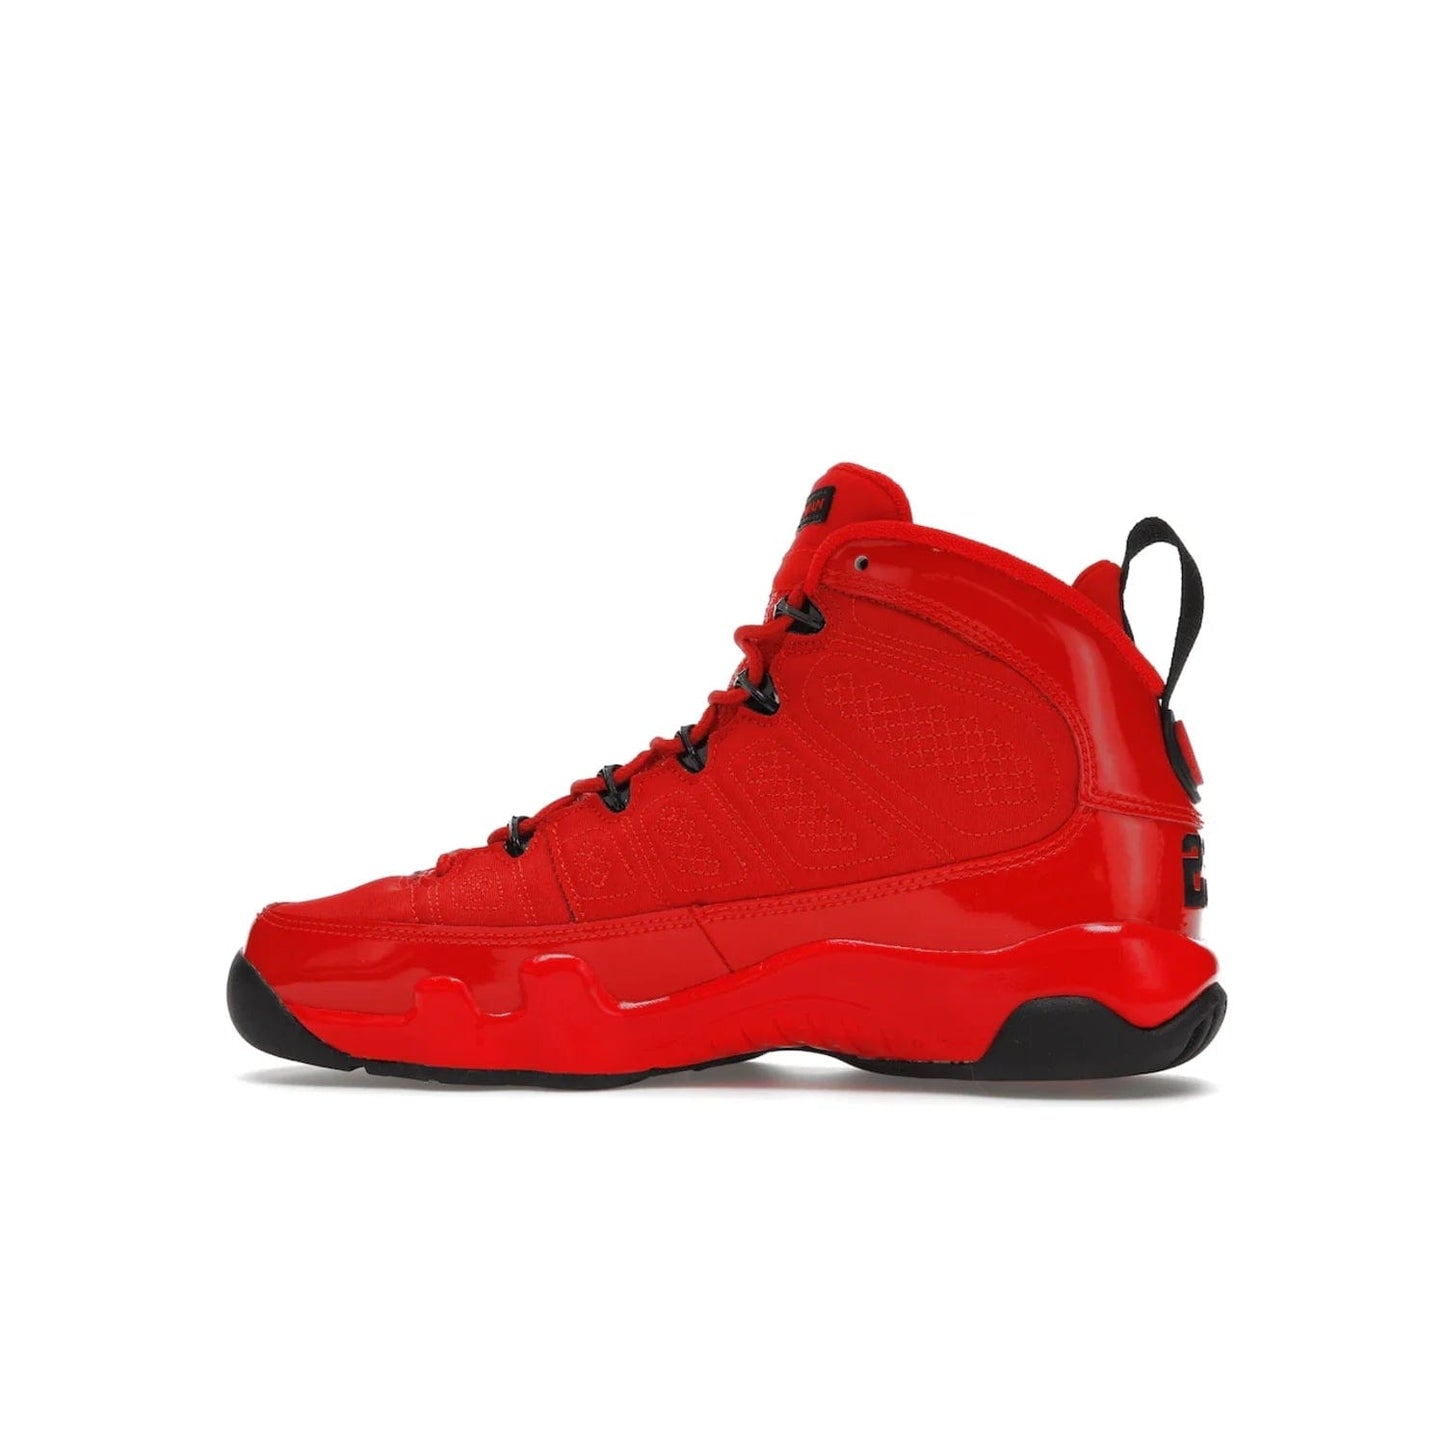 Jordan 9 Retro Chile Red (GS) - Image 20 - Only at www.BallersClubKickz.com - Introducing the Air Jordan 9 Retro Chile Red (GS), a vintage 1993 silhouette with fiery colorway. Features quilted side paneling, glossy patent leather, pull tabs, black contrast accents, and foam midsole. Launching May 2022 for $140.